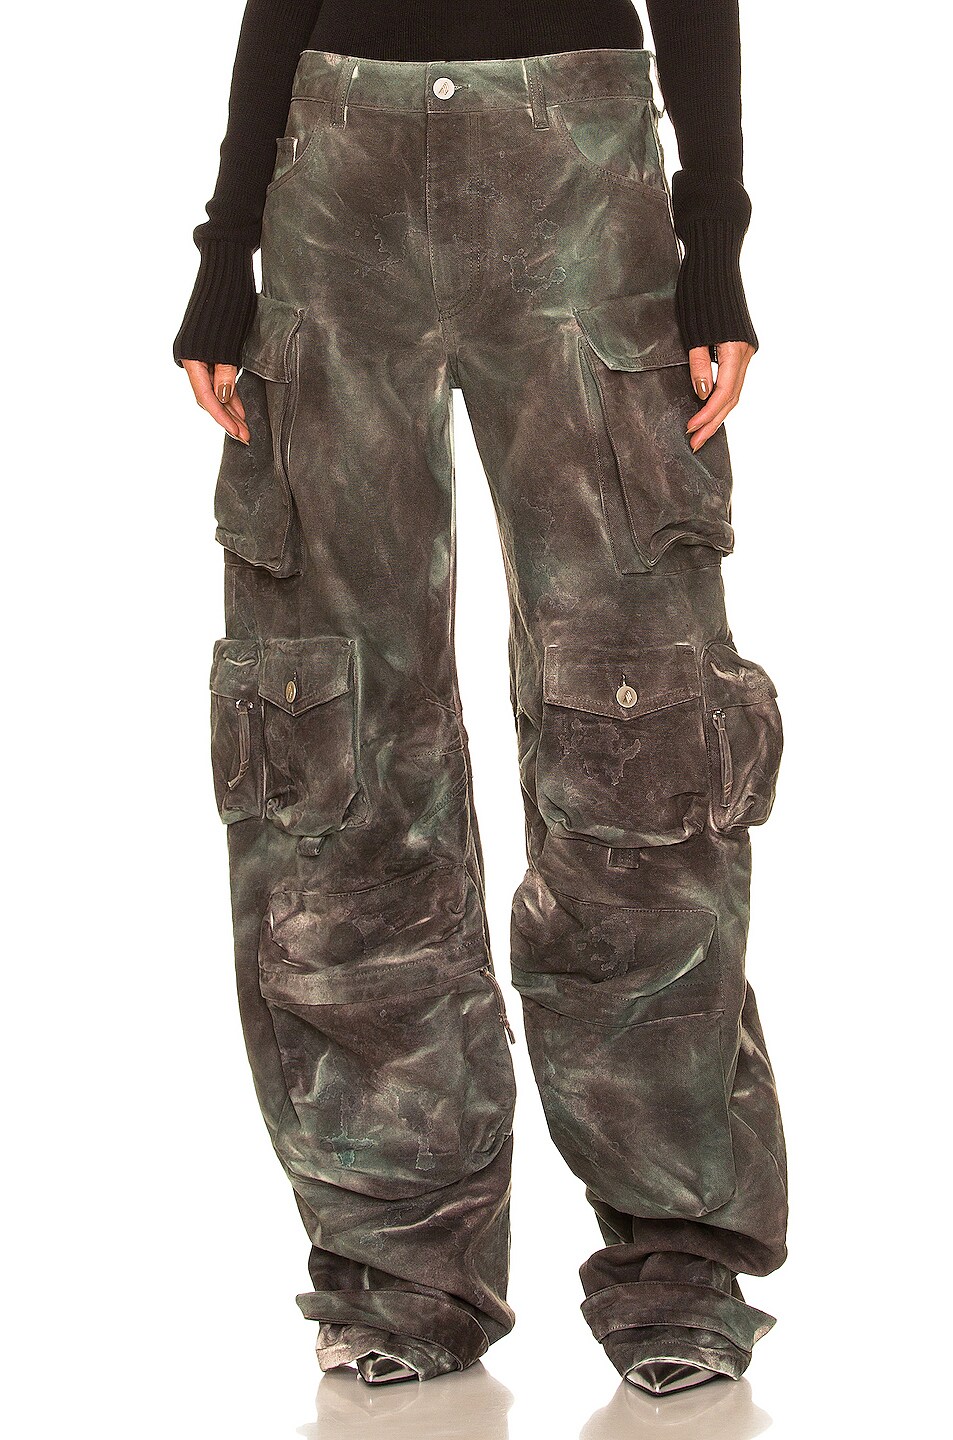 THE ATTICO Fern Cargo in Stained Green Camouflage | FWRD